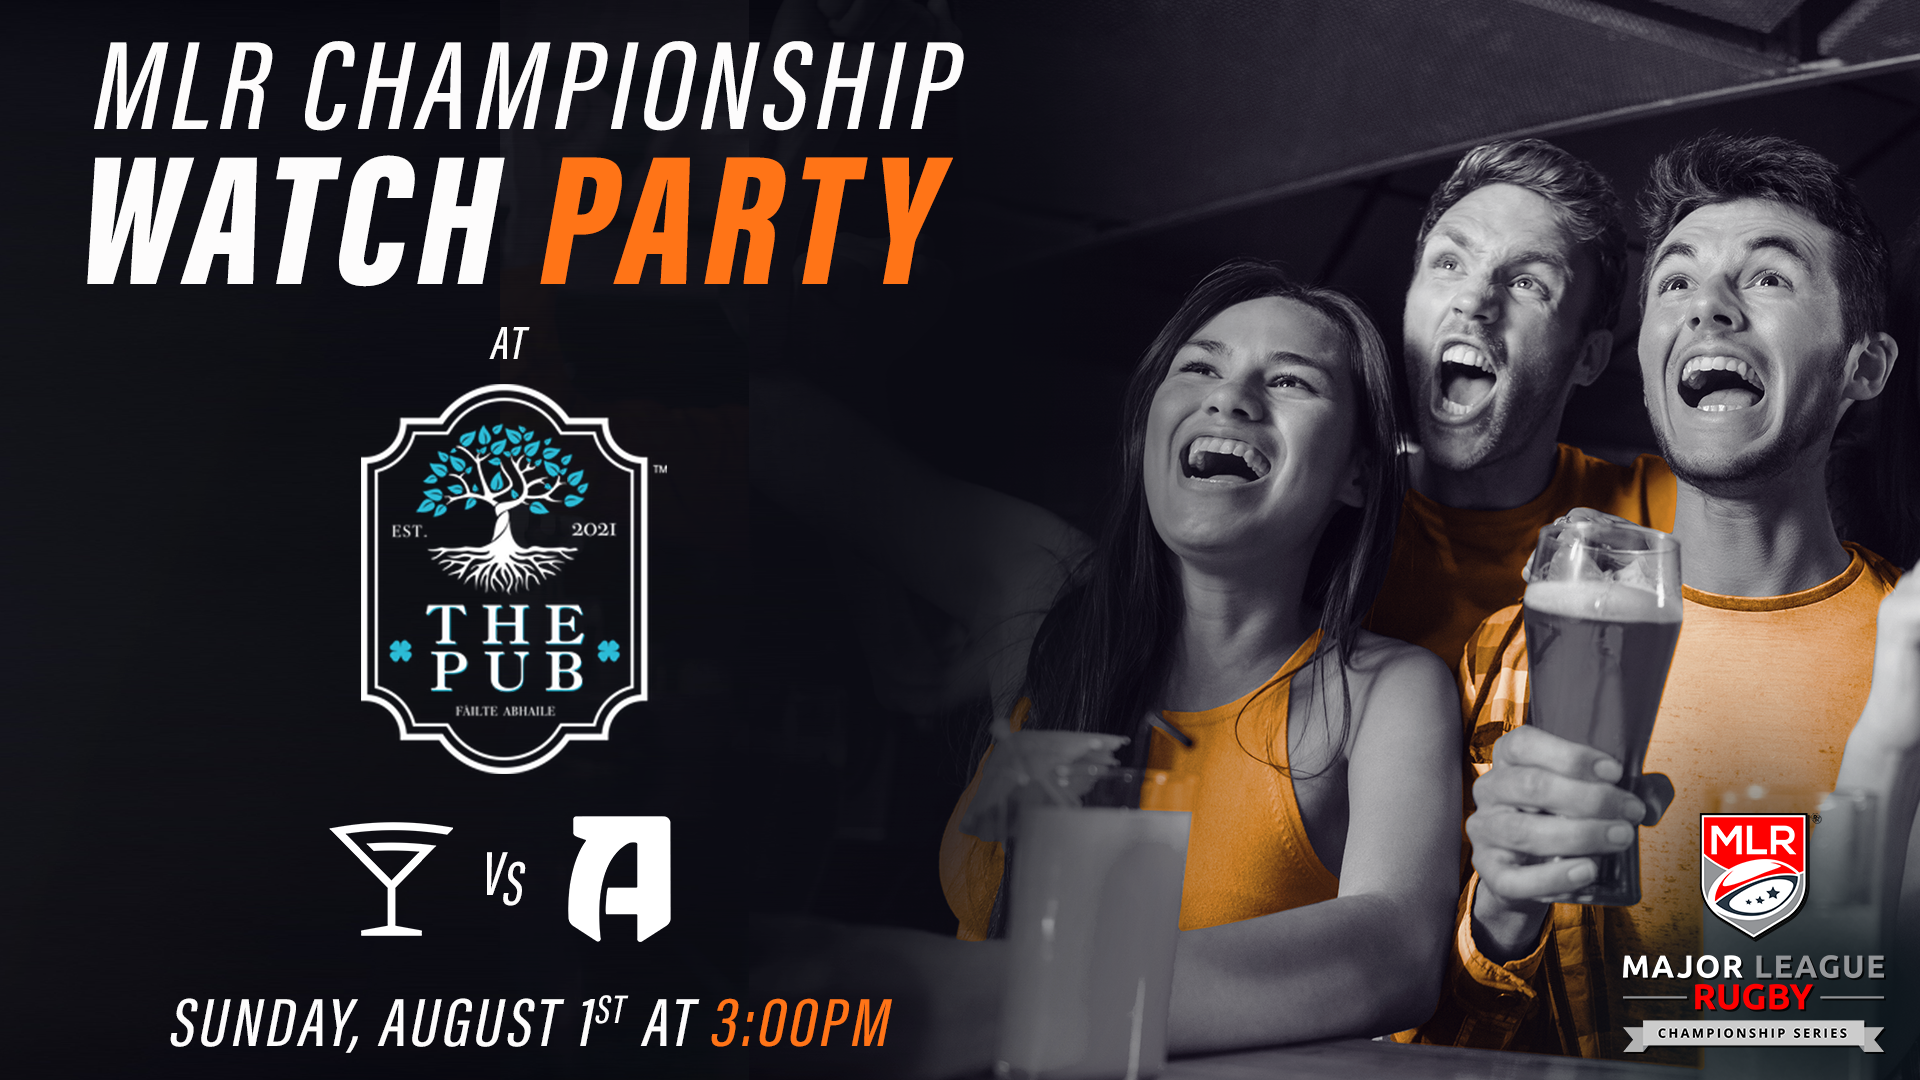 Come Out To The MLR Championship Watch Party At The Pub!